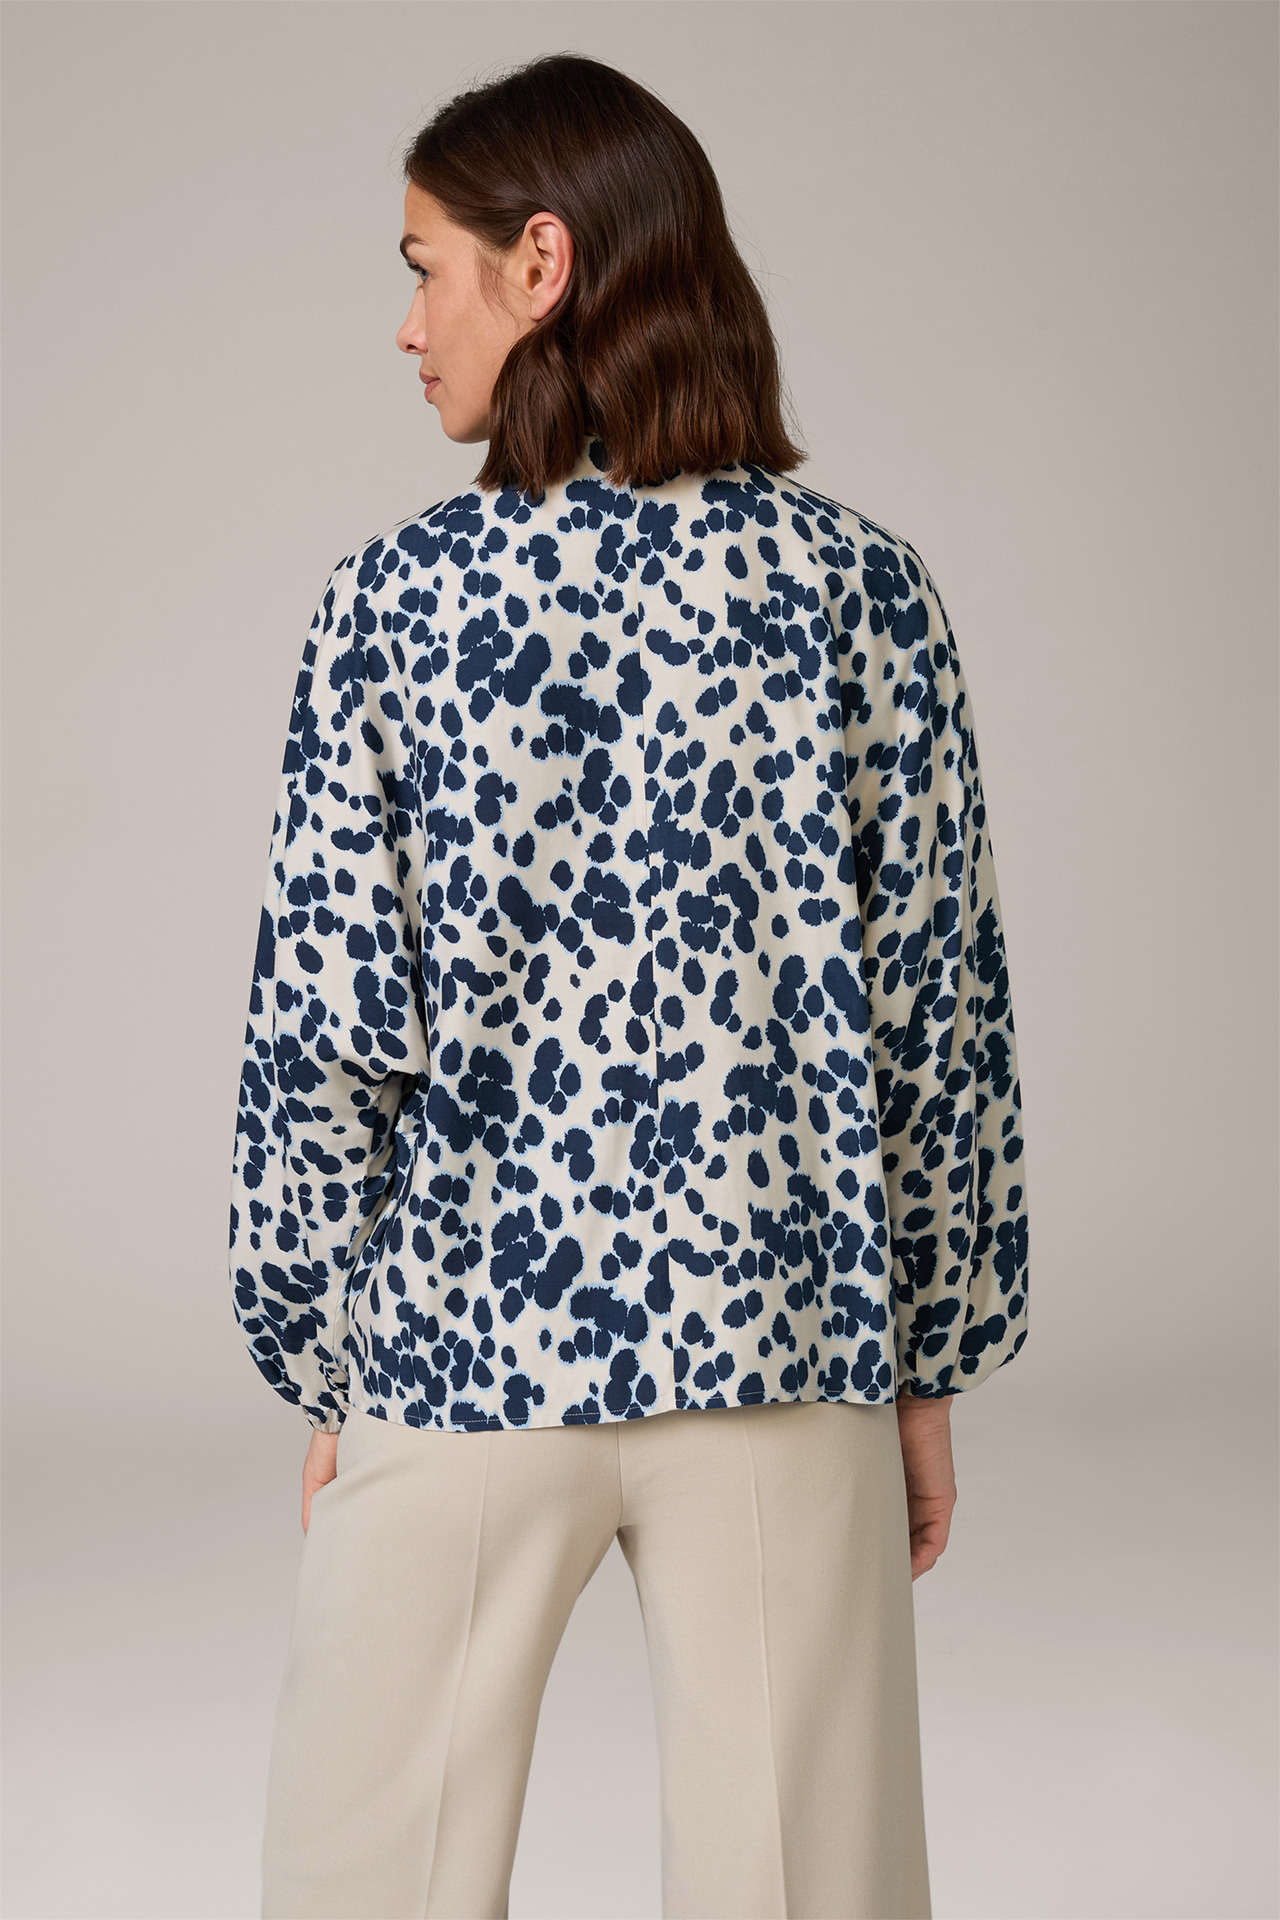 Printed Blouse made of Viscose and Silk in an Ecru and Blue Pattern